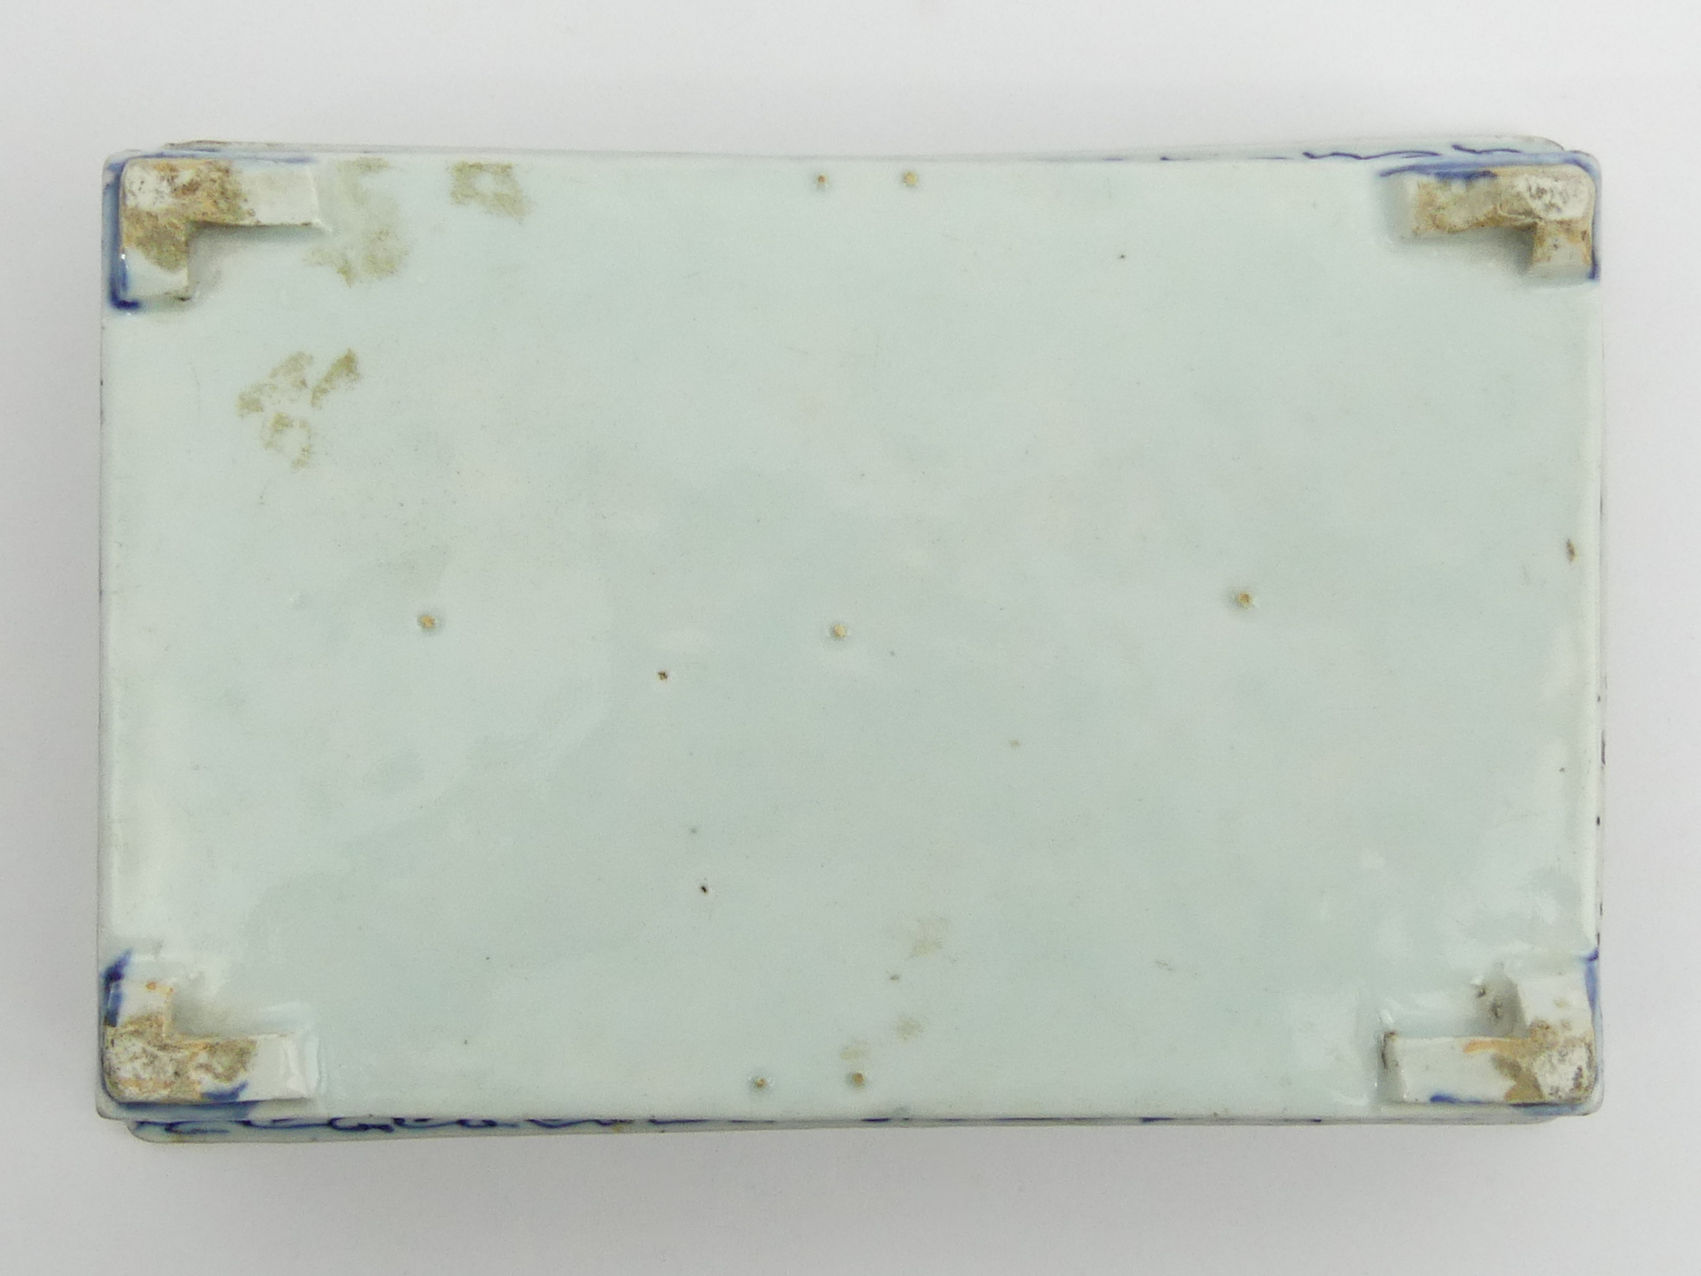 Chinese blue and white reticulated porcelain flower trough. 23.5 x 15.5 x 6 cm. UK Postage £12. - Image 5 of 5